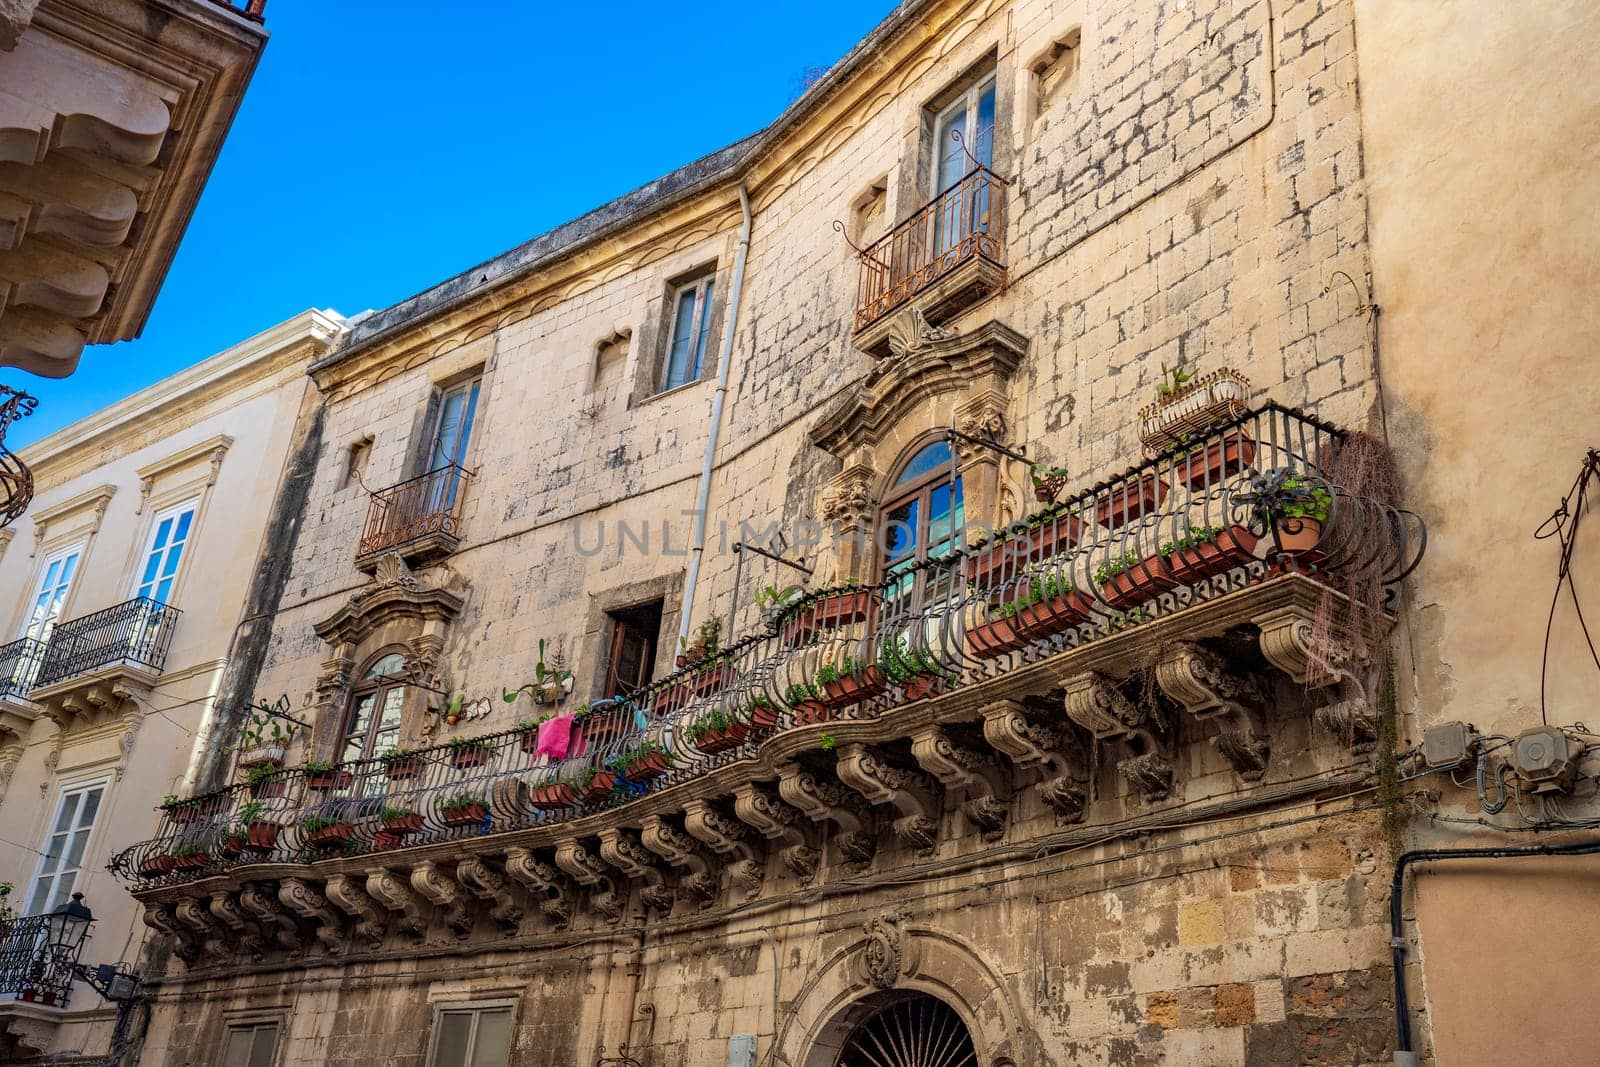 Sicily. One of the spectacular balconies in the city is an example of the Sicilian baroque style. by EdVal